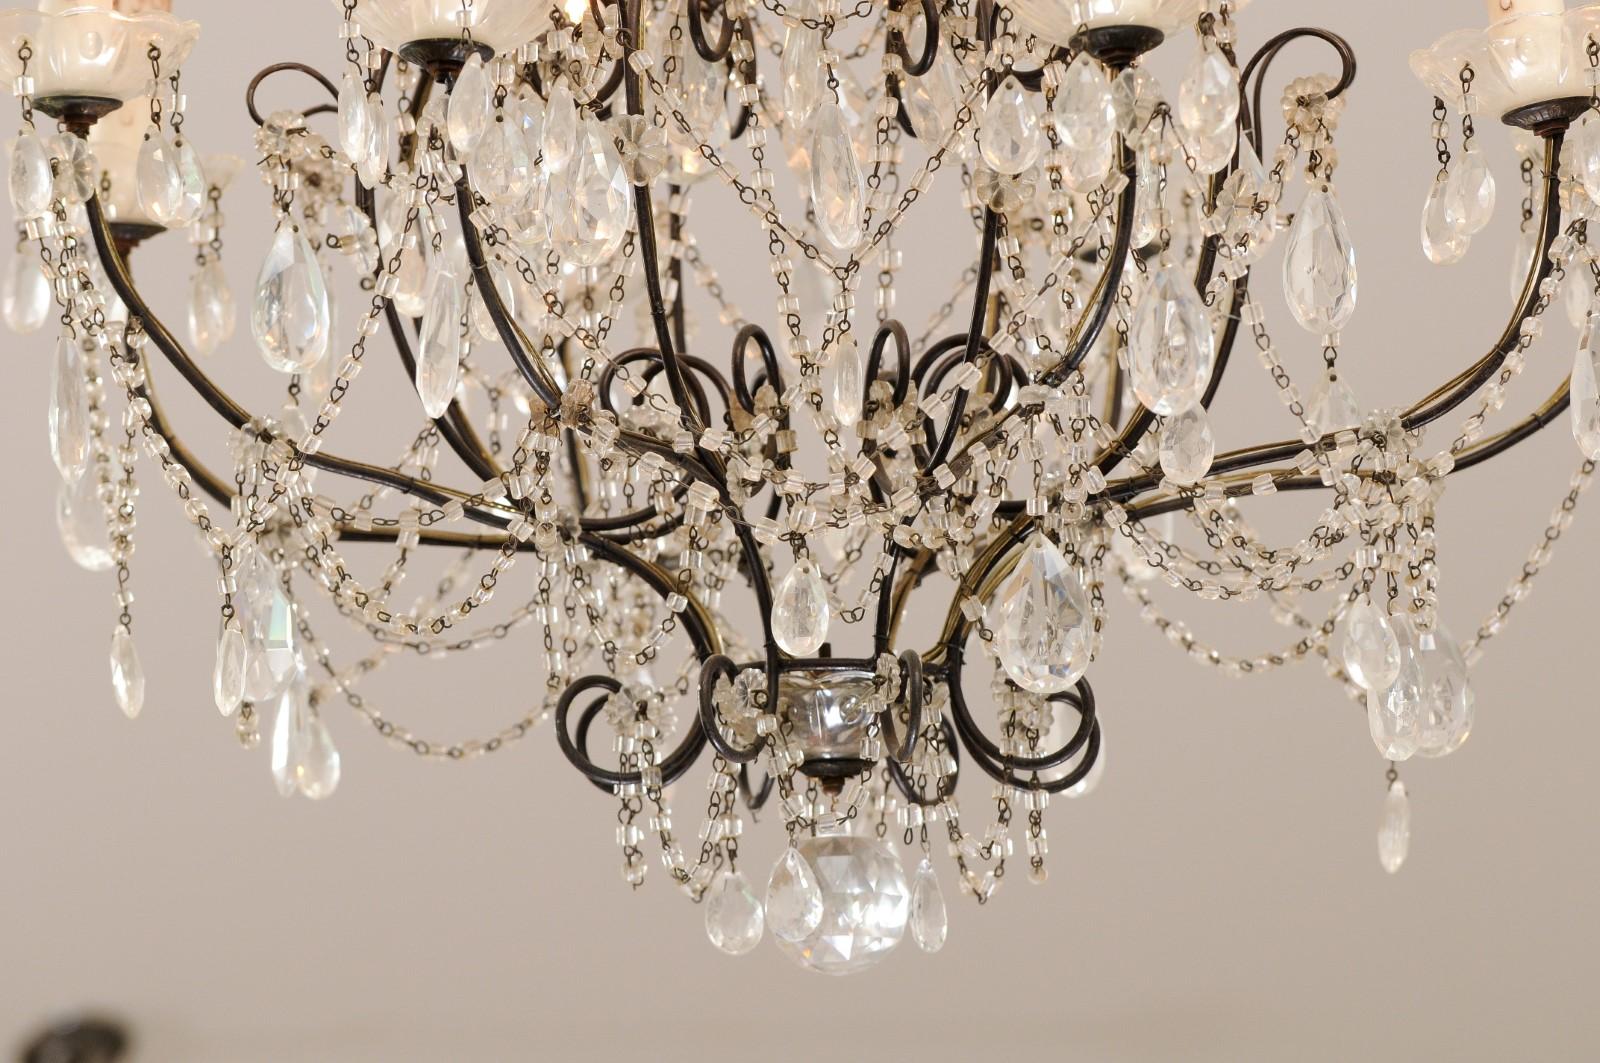 Italian 19th Century 10-Light Crystal and Iron Chandelier with Scrolling Arms For Sale 2